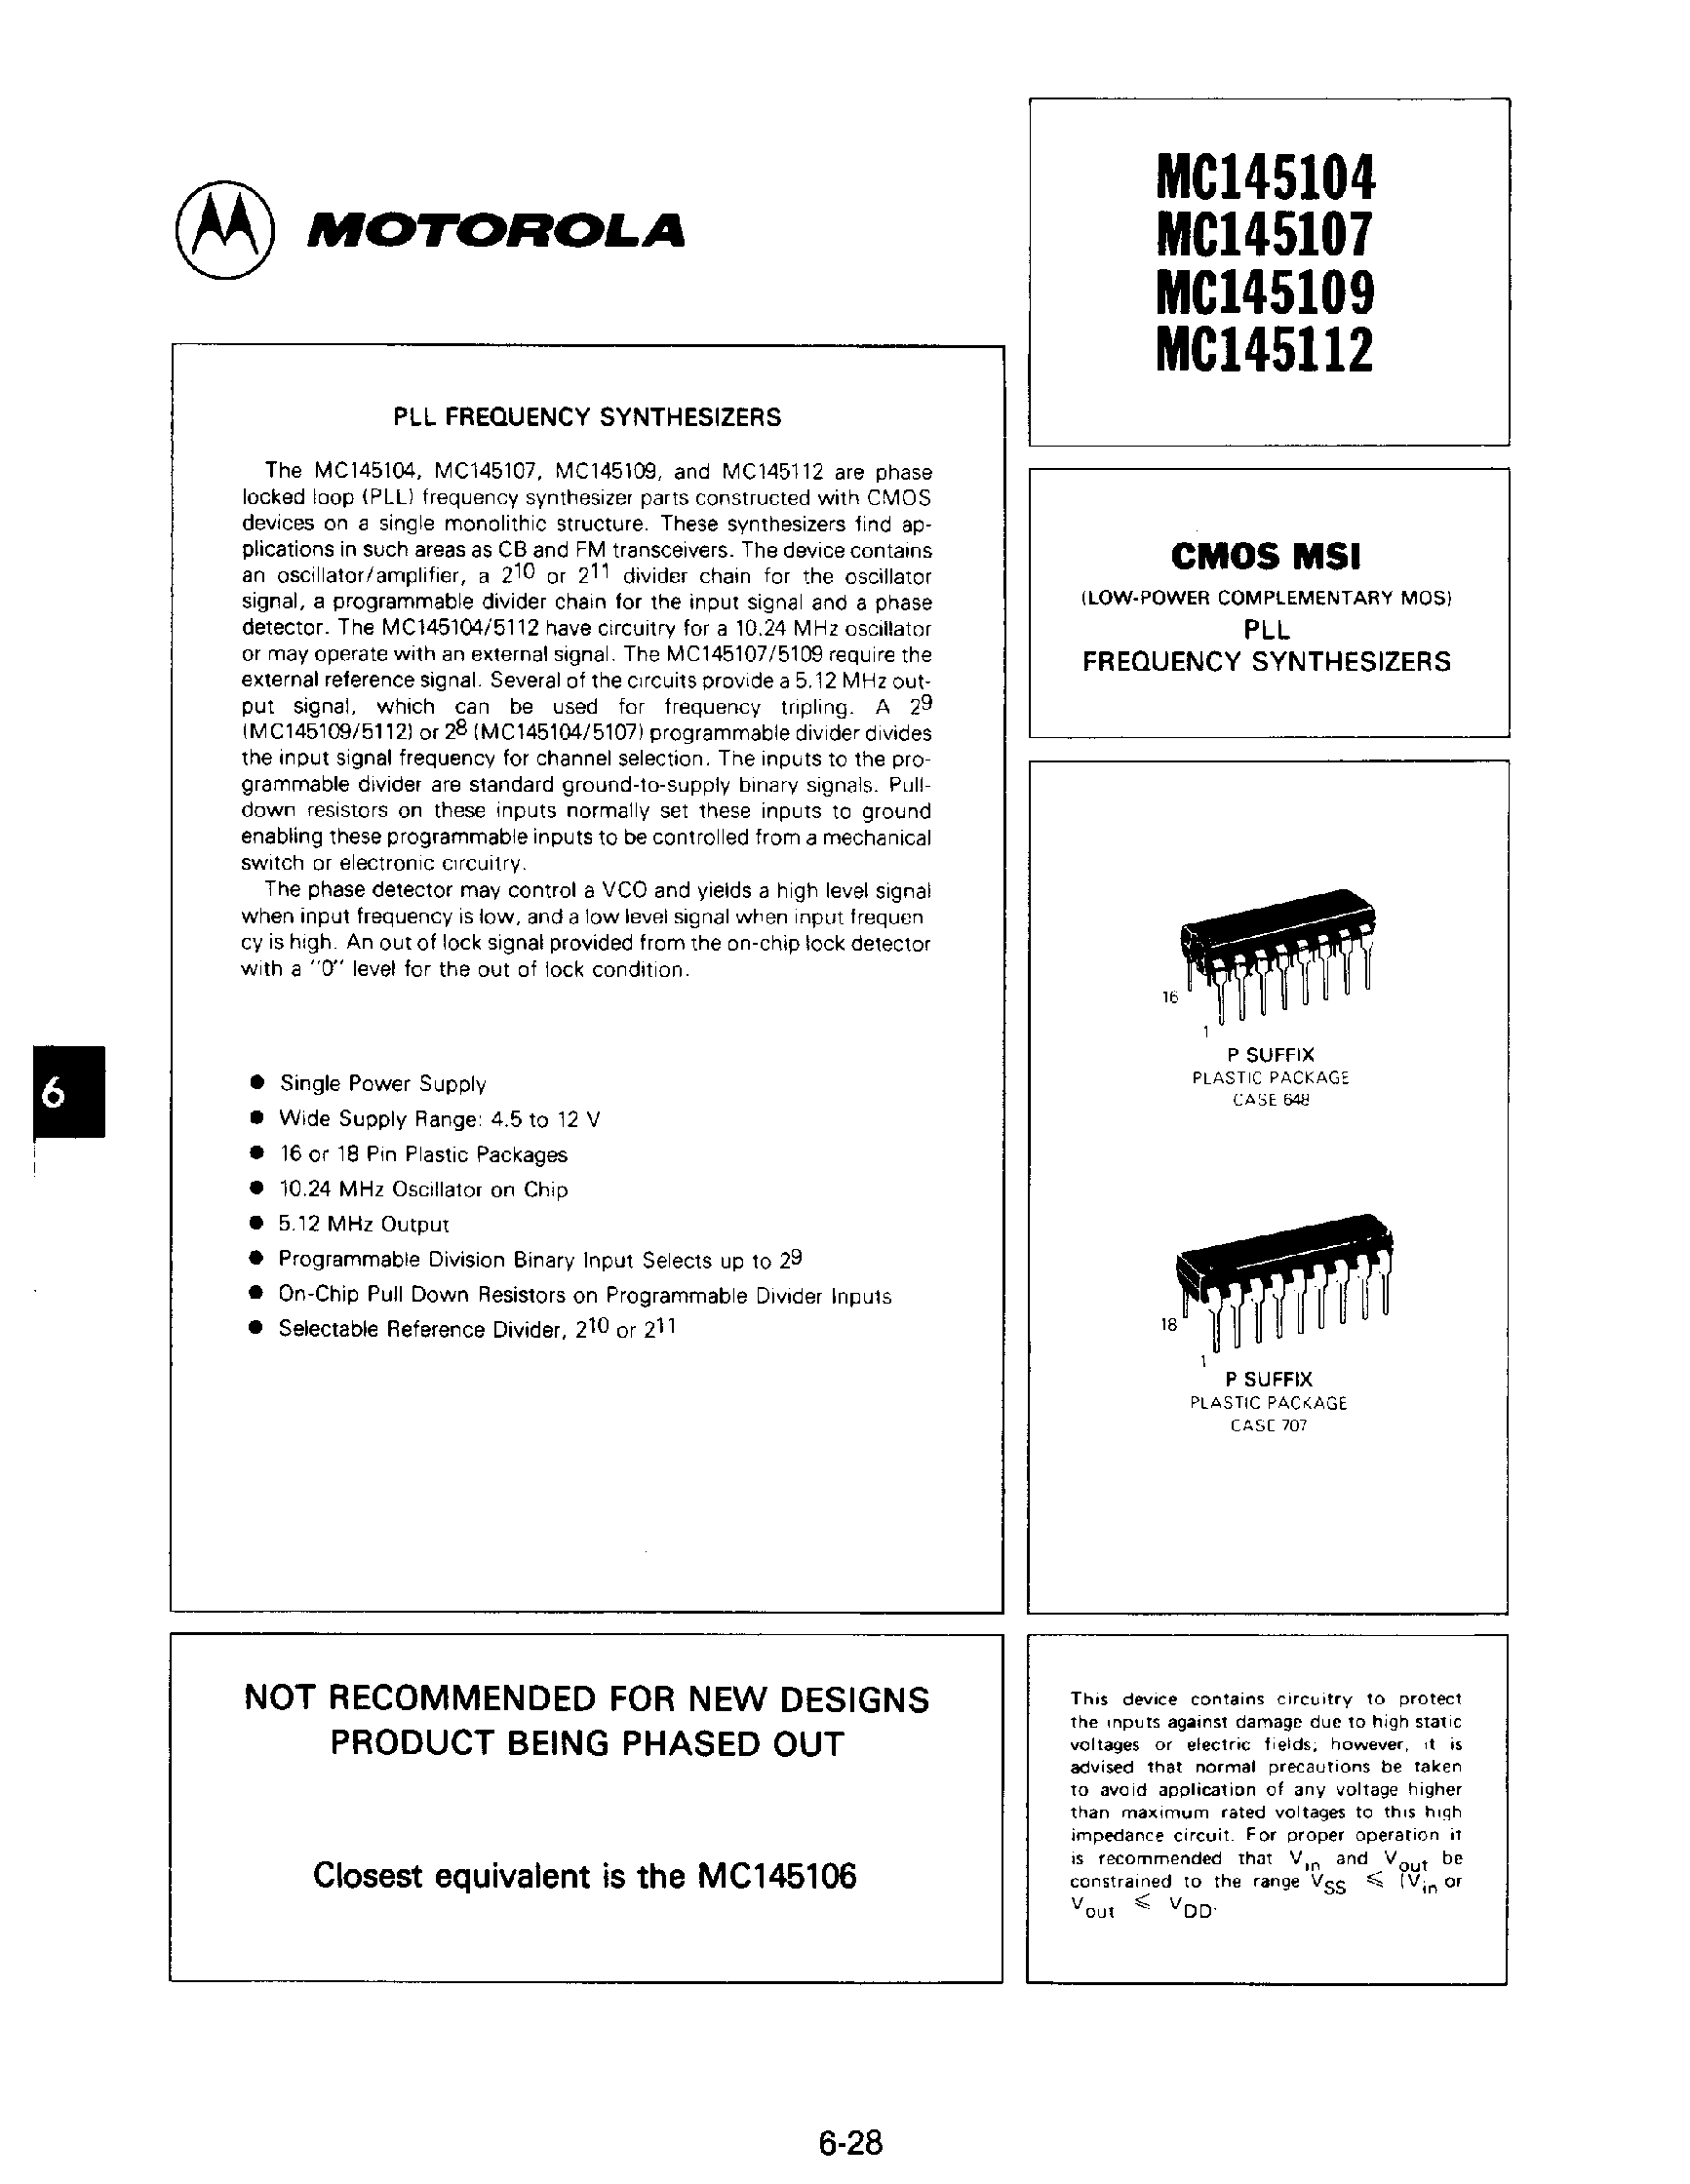 Datasheet MC145104 - (MC145104 - MC145112) CMOS LSI (LOW-POWER COMPLEMENTARY MOS) PLL FREQUENCY SYNTHESIZERS page 1